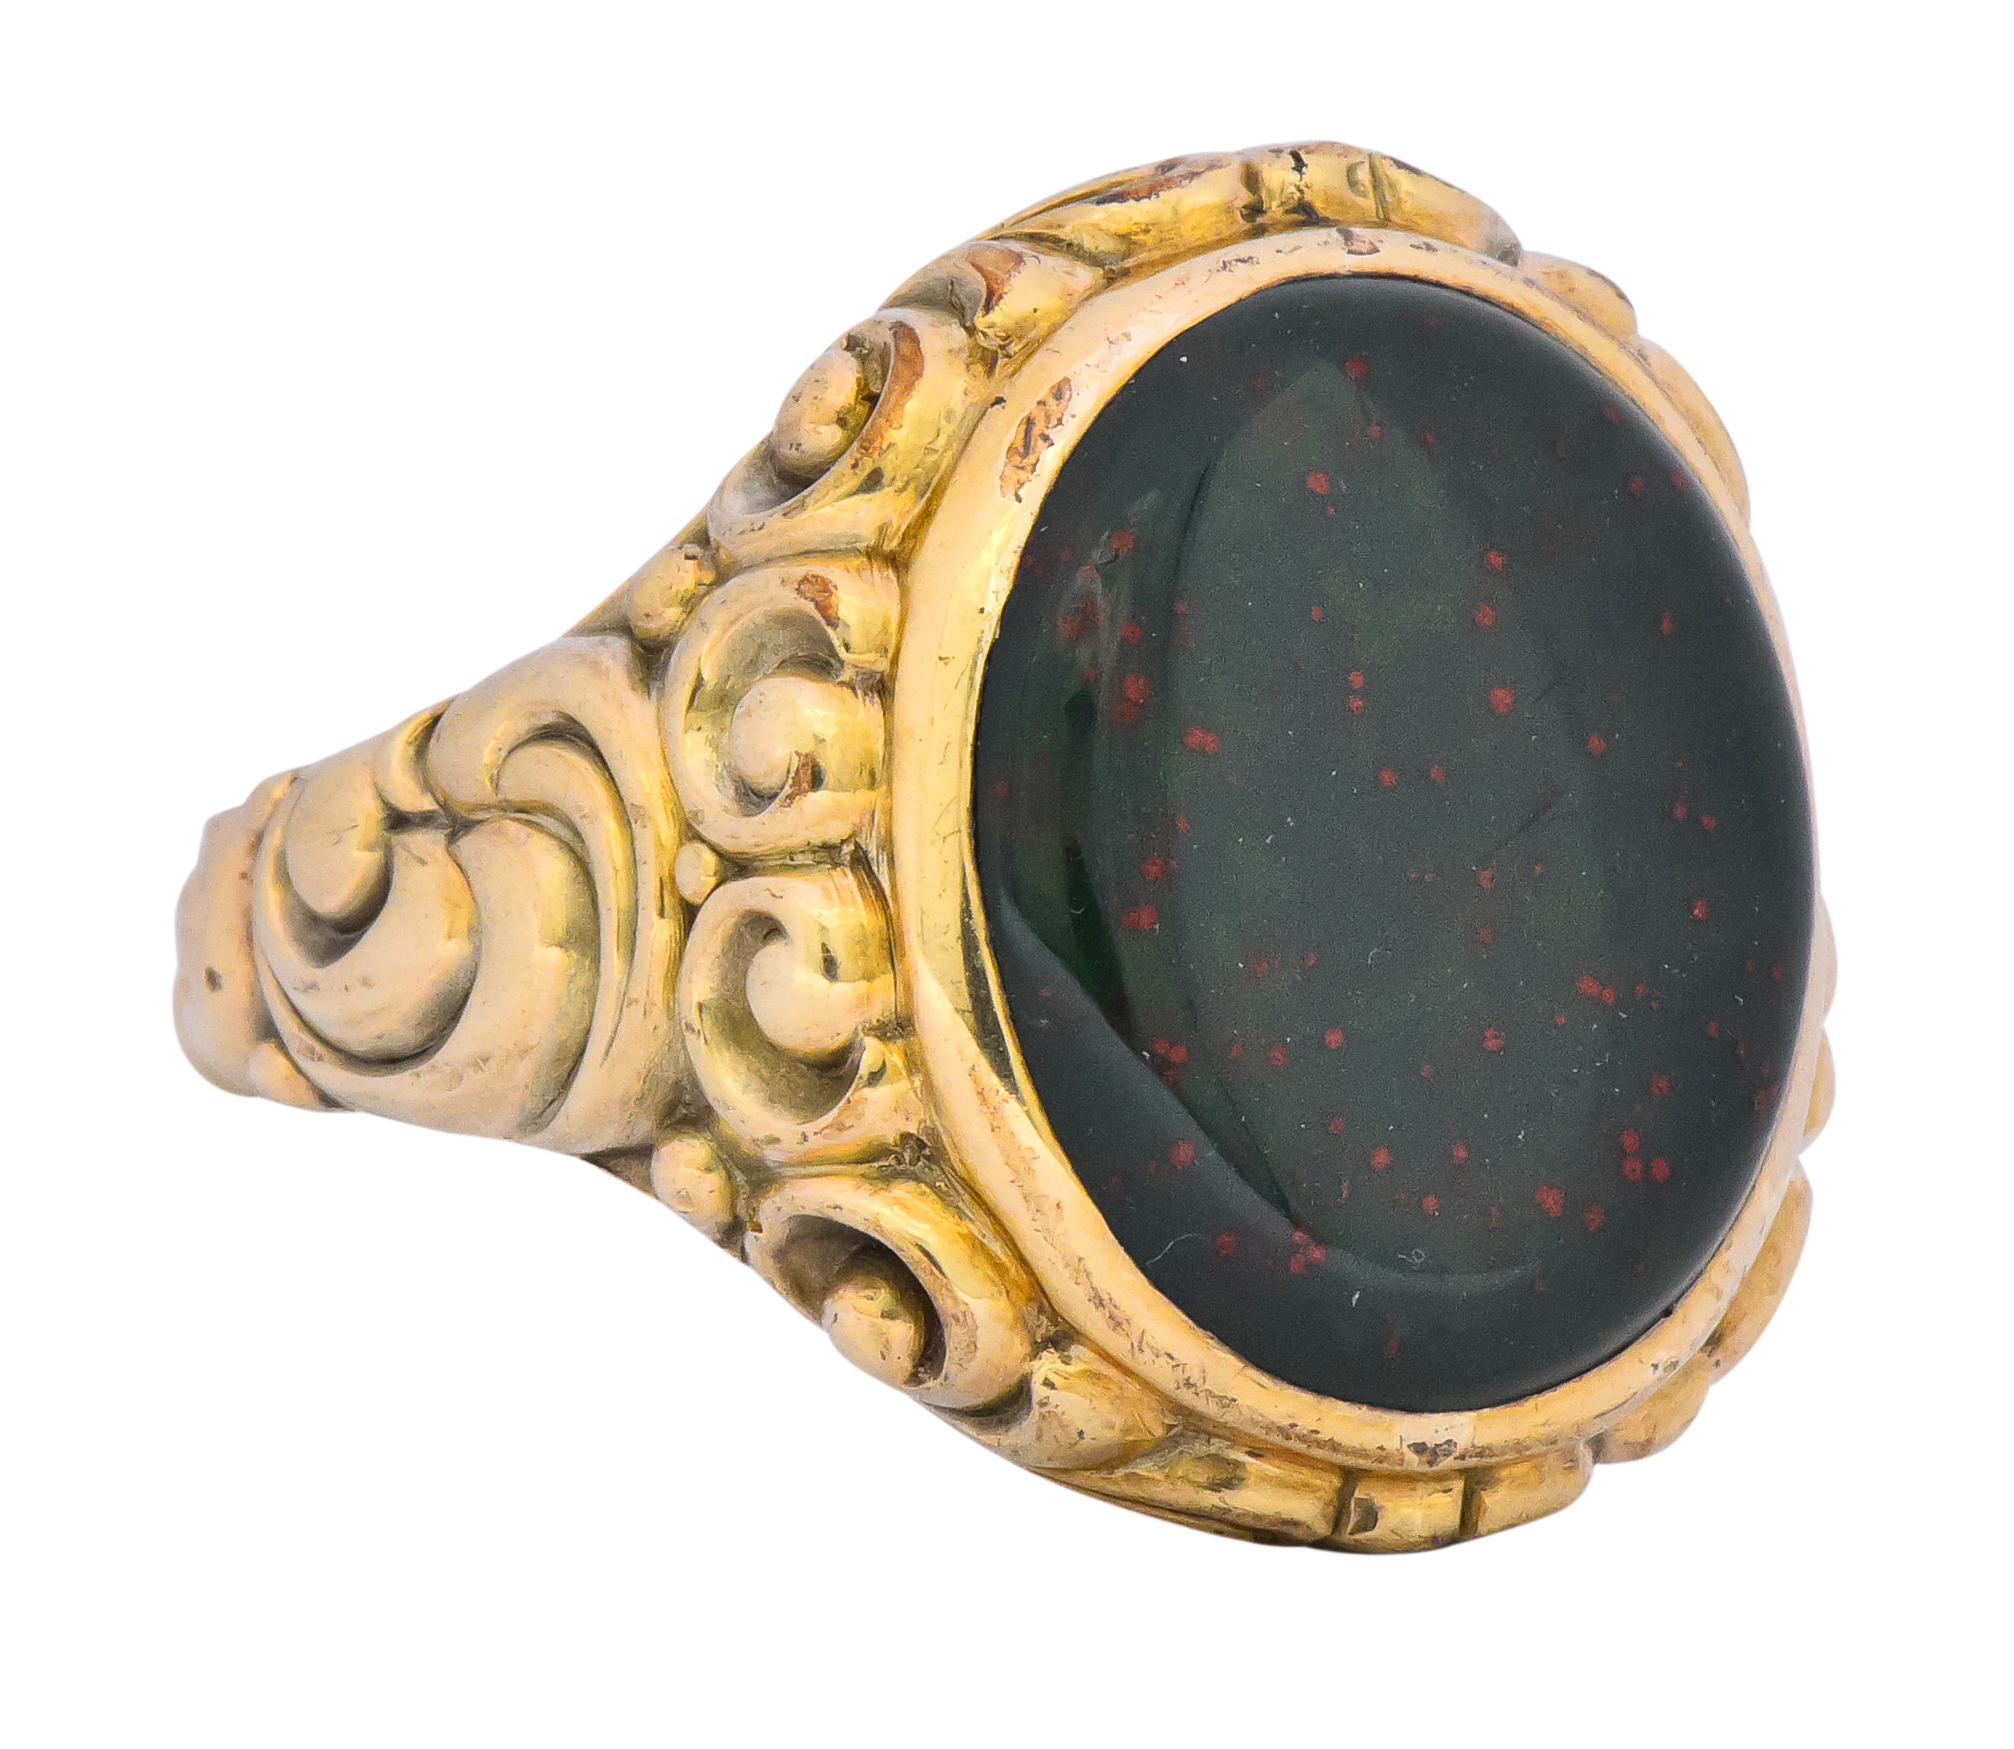 Centering an oval flat polished cabochon bloodstone, measuring approximately 17.0 x 14.7 mm, deep green and flecked with red

Bezel set in high polished gold

With scrolling gold work upon gallery and down the shank

Maker's mark and stamped 333 for